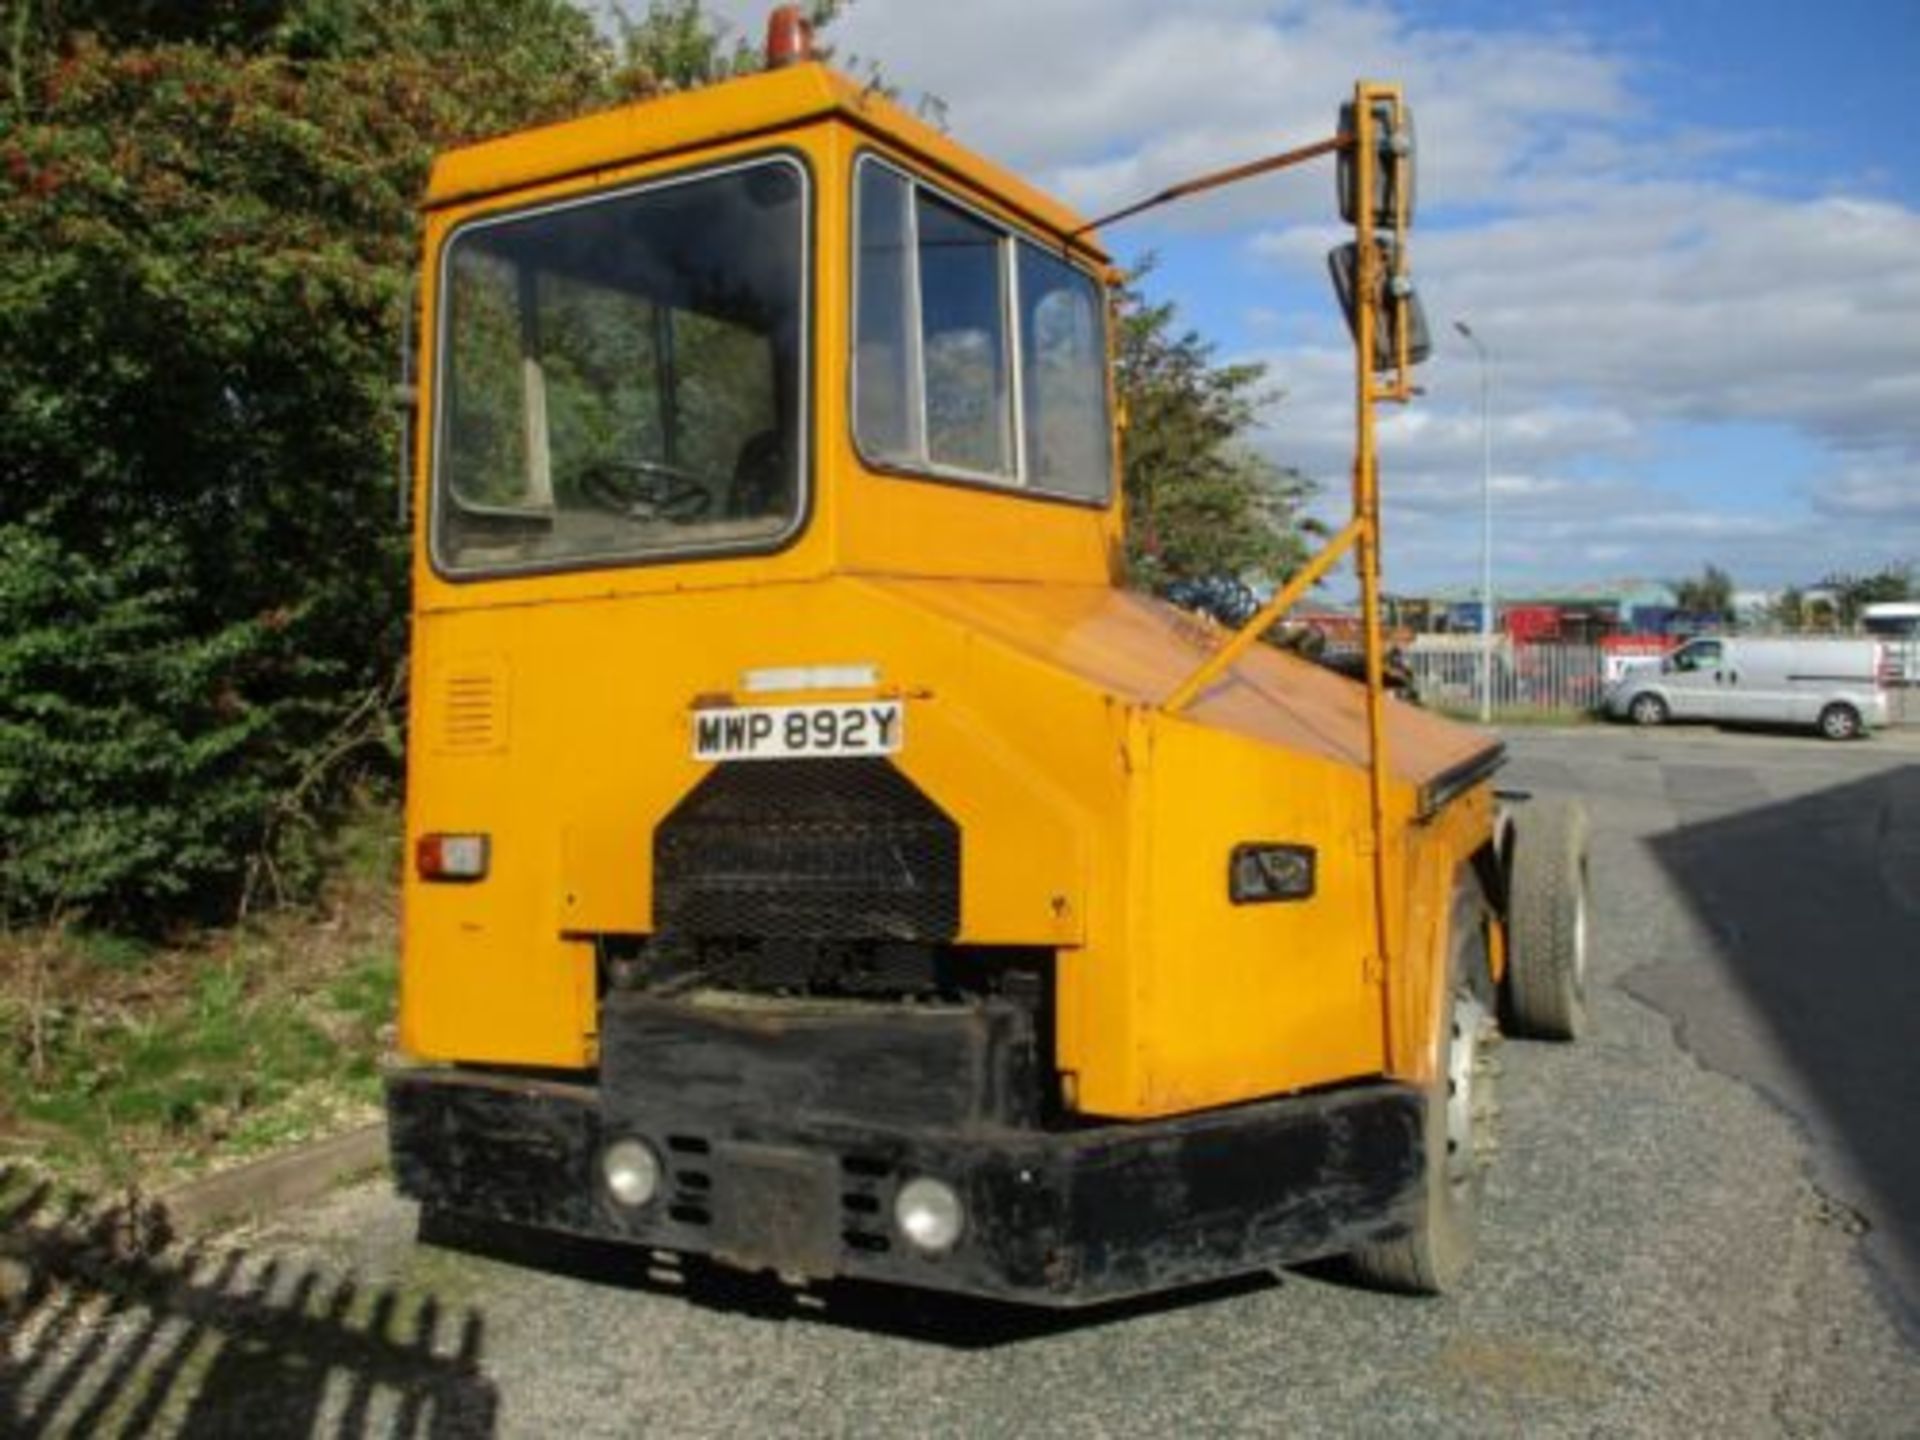 RELIANCE DOCK SPOTTER SHUNTER TOW TUG TRACTOR UNIT PERKINS V8 TERBERG DELIVERY - Image 3 of 11